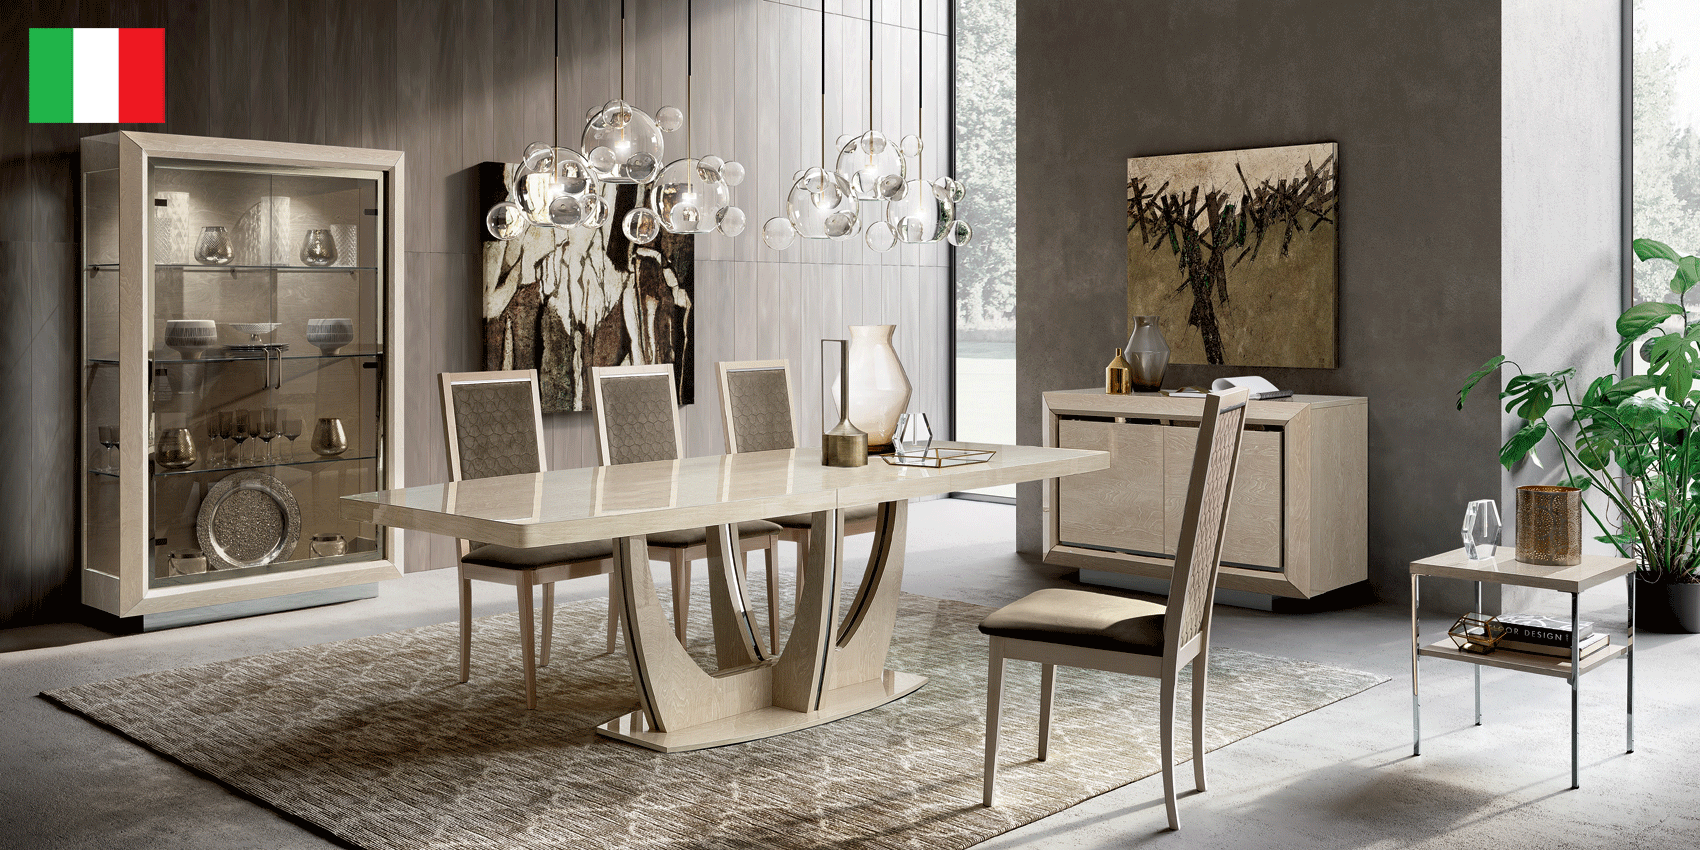 Brands Garcia Laurel & Hardy Tables Elite Dining Ivory with Ambra “Rombi” Chairs